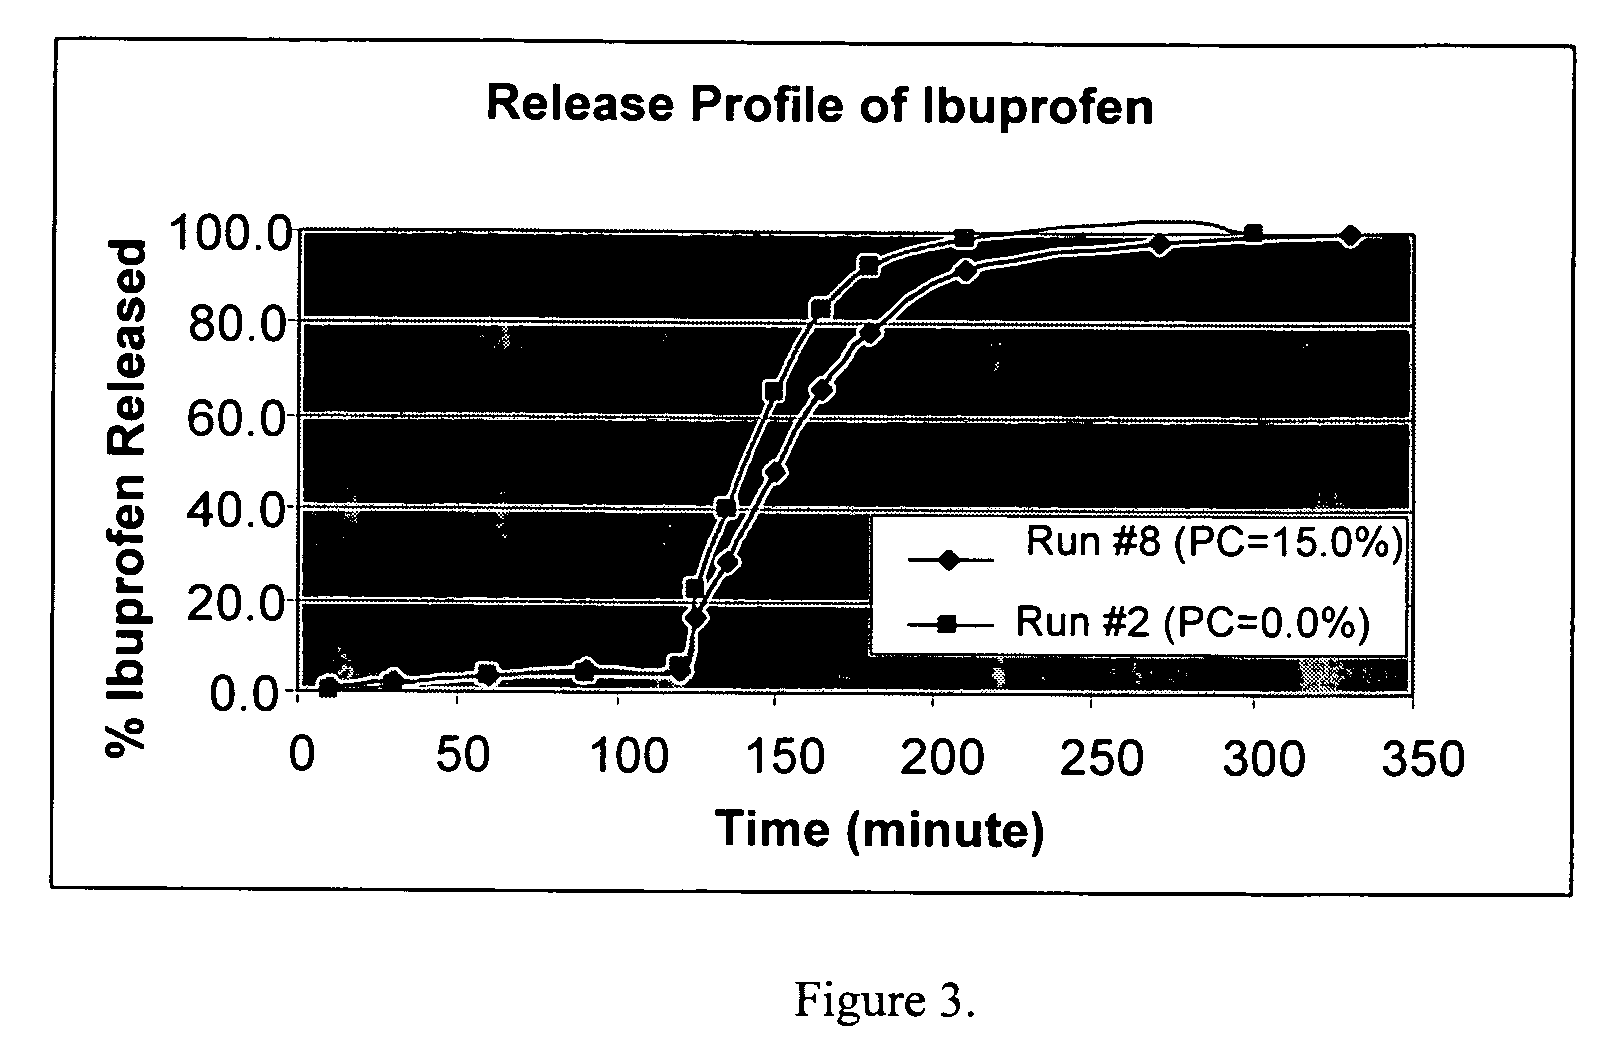 Liquid dosage forms having enteric properties of delayed and then sustained release